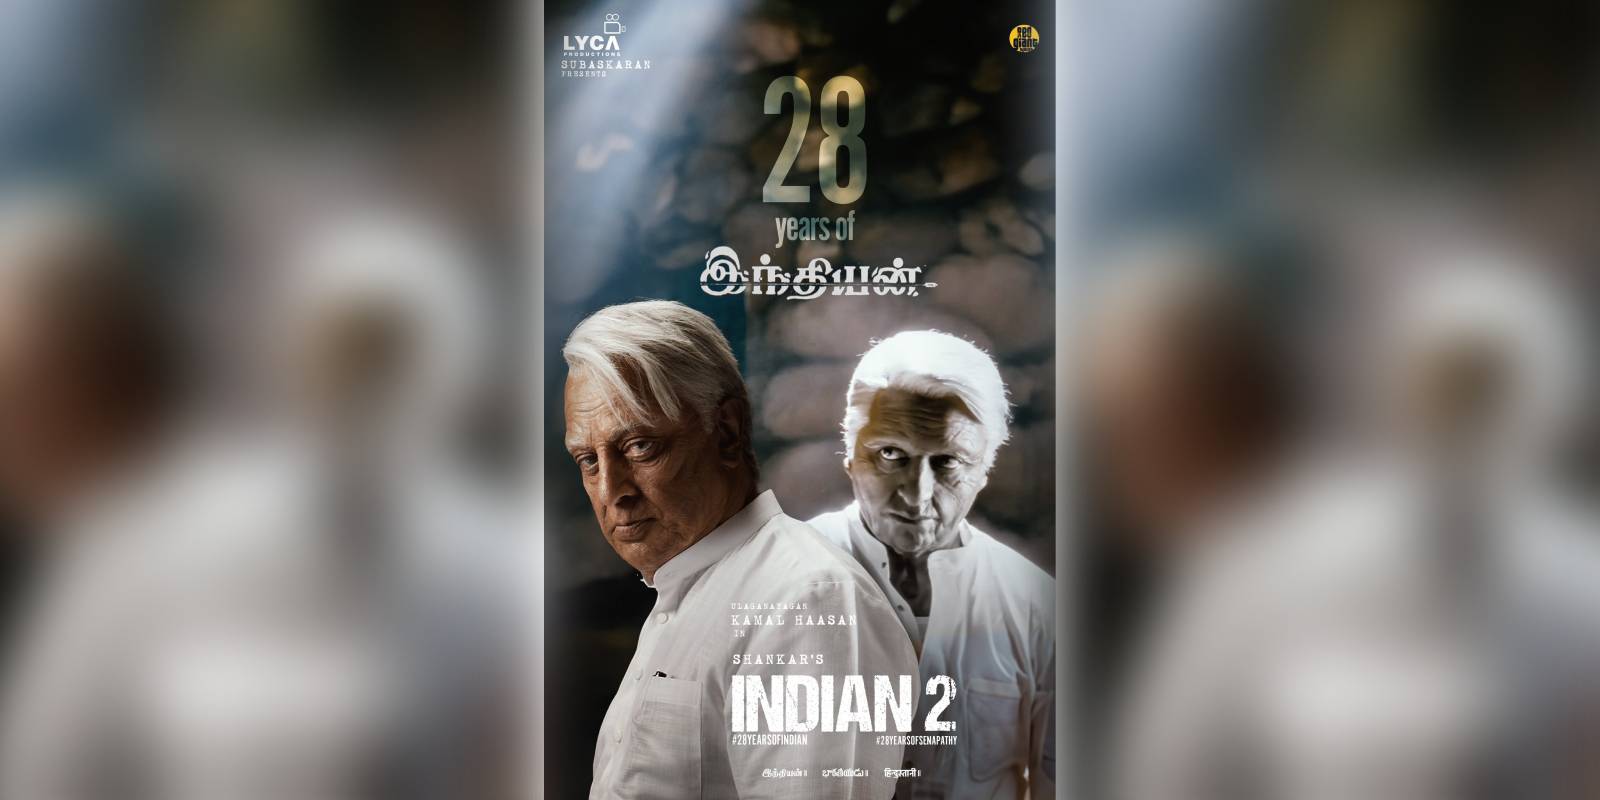 28 years of Indian, Shankar releases a new poster